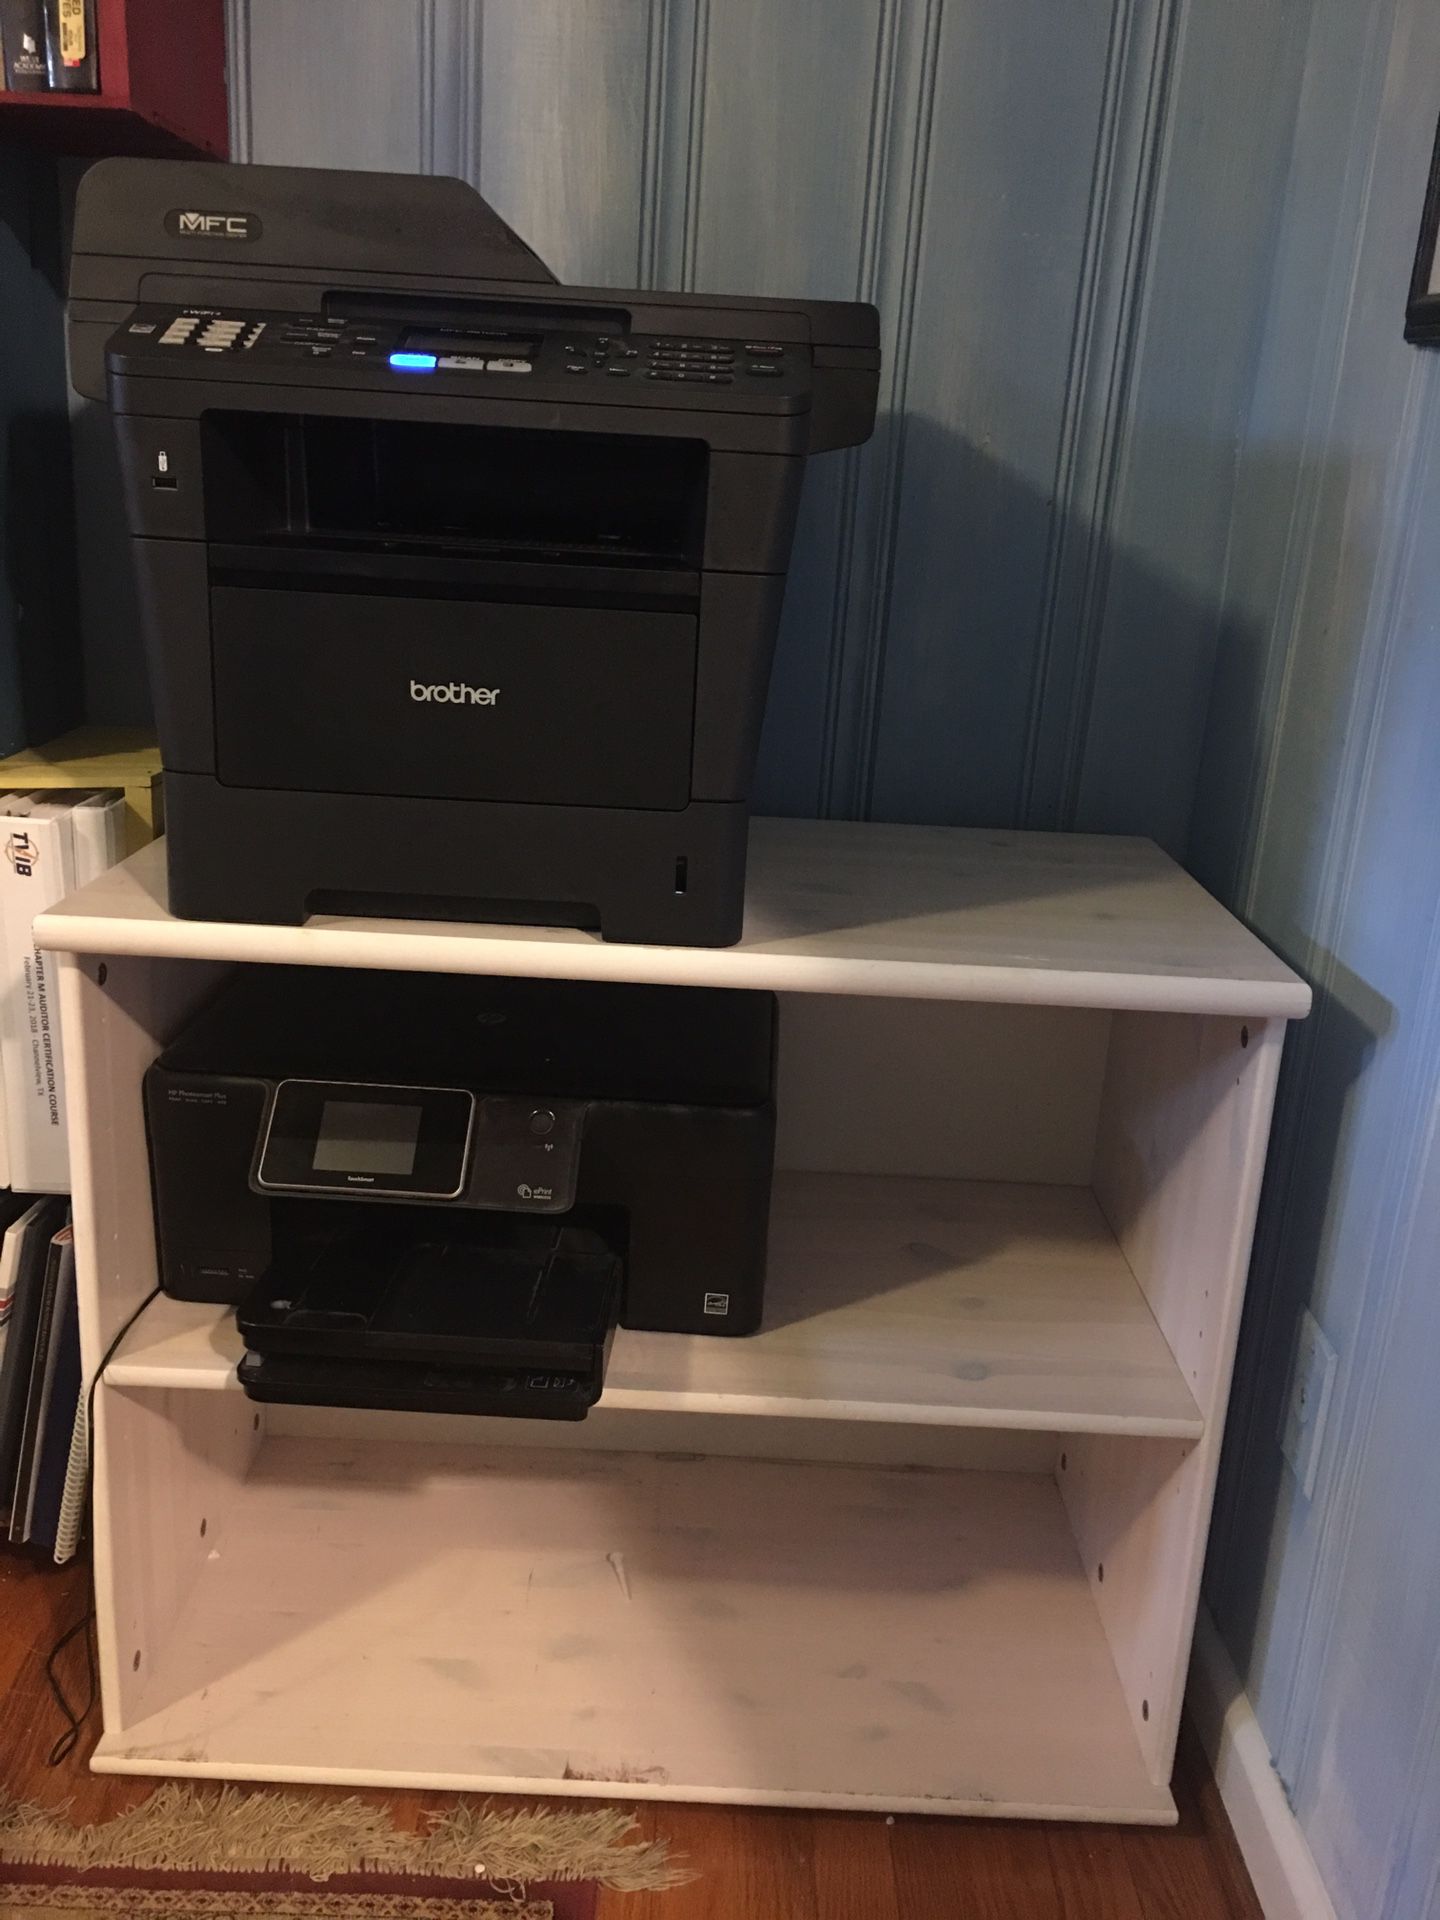 Printer stand (printers not included)